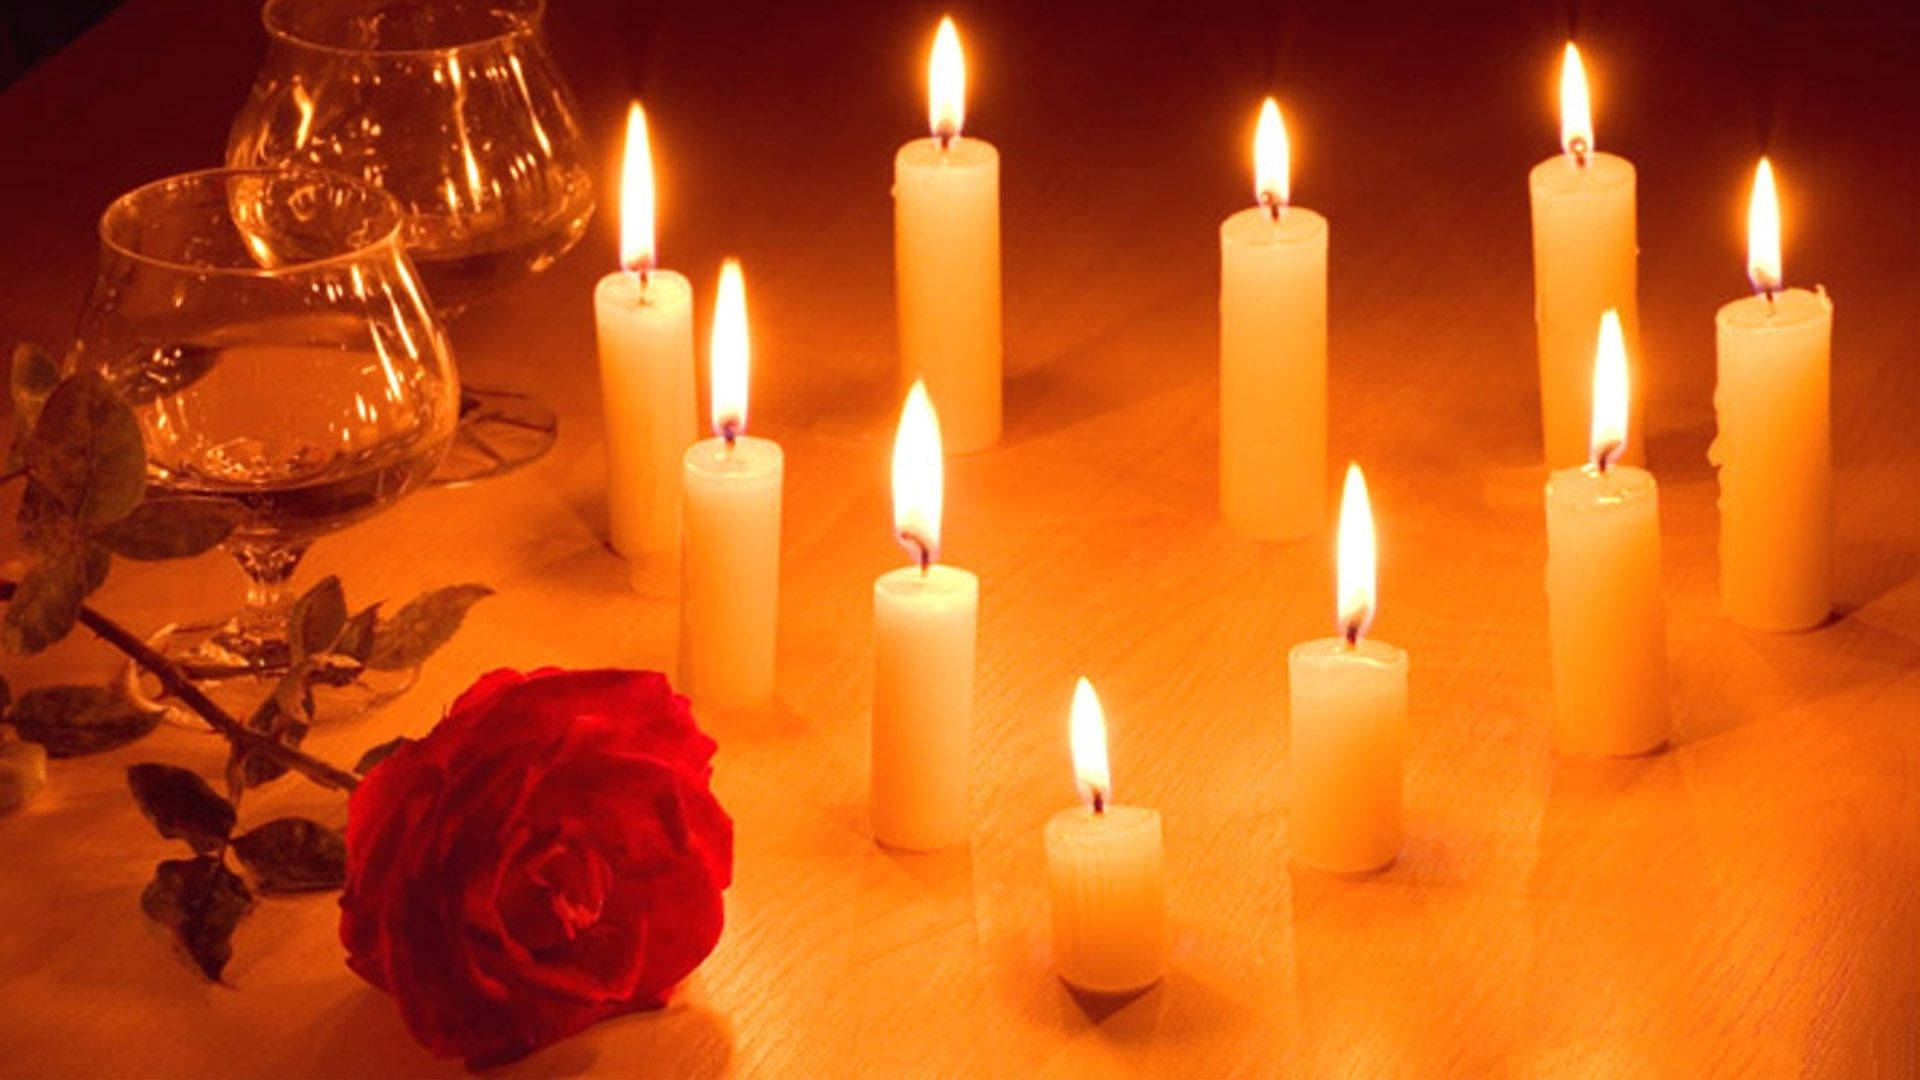 Candles And A Rose Wallpaper